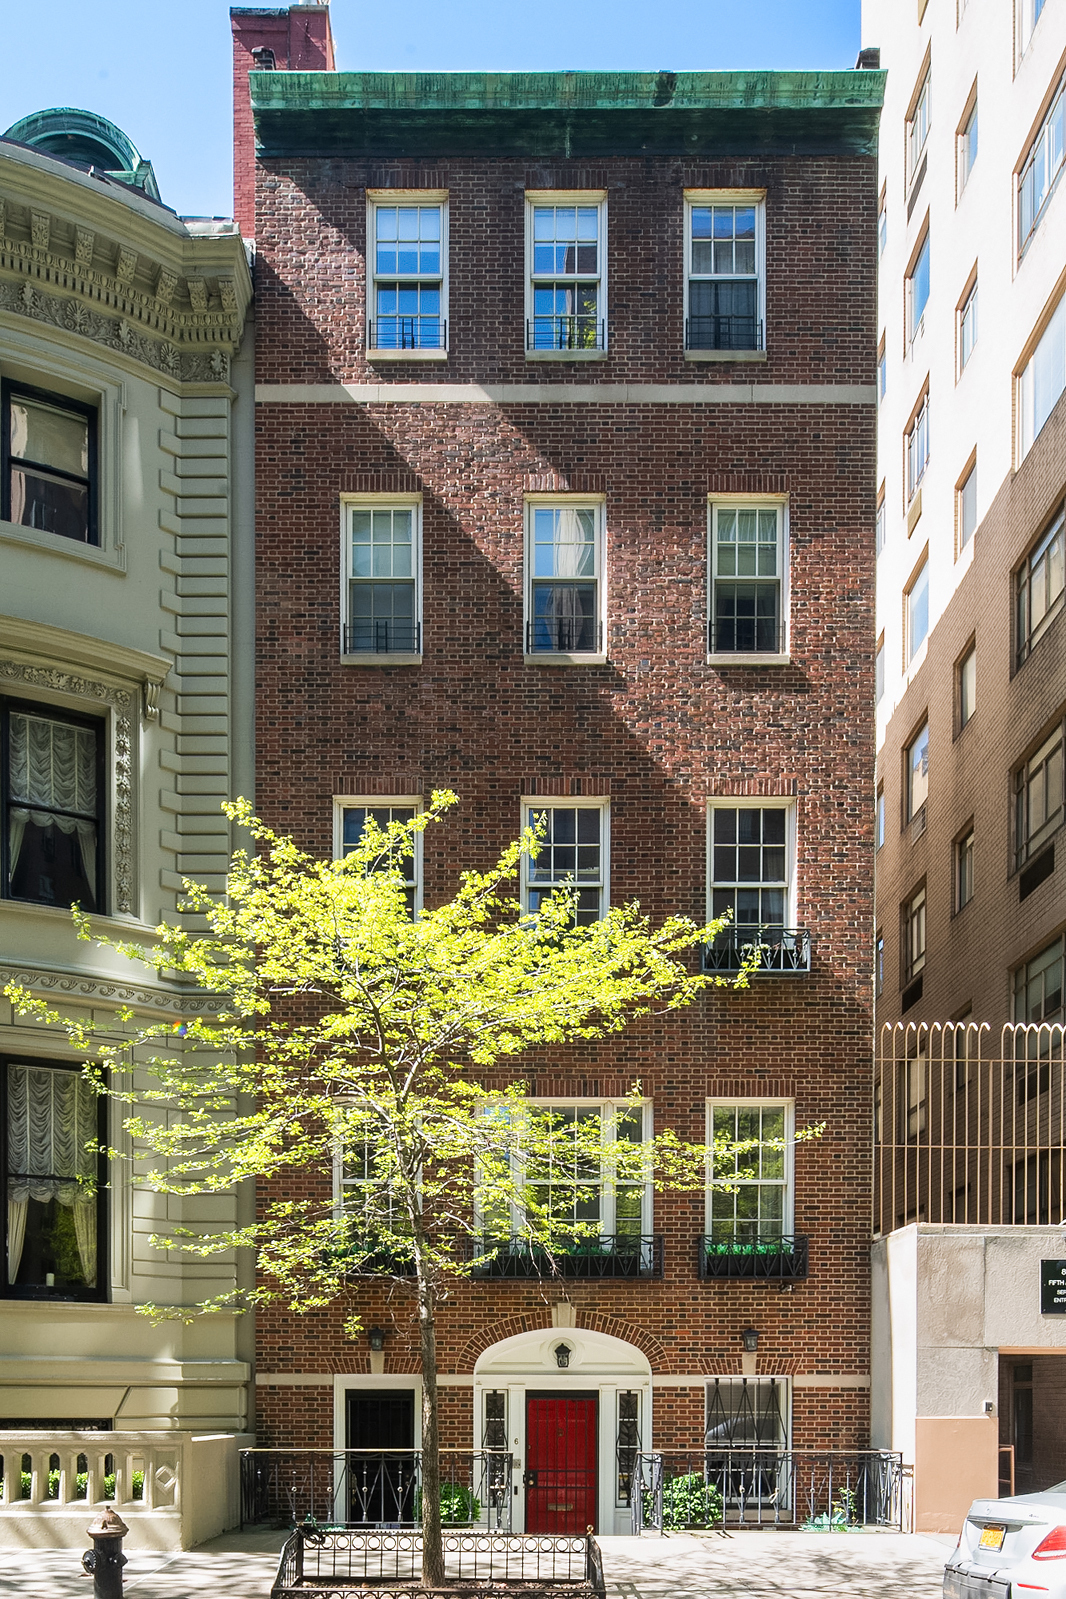 6 East 69th Street, Lenox Hill, Upper East Side, NYC - 7 Bedrooms  5.5 Bathrooms  16 Rooms - 